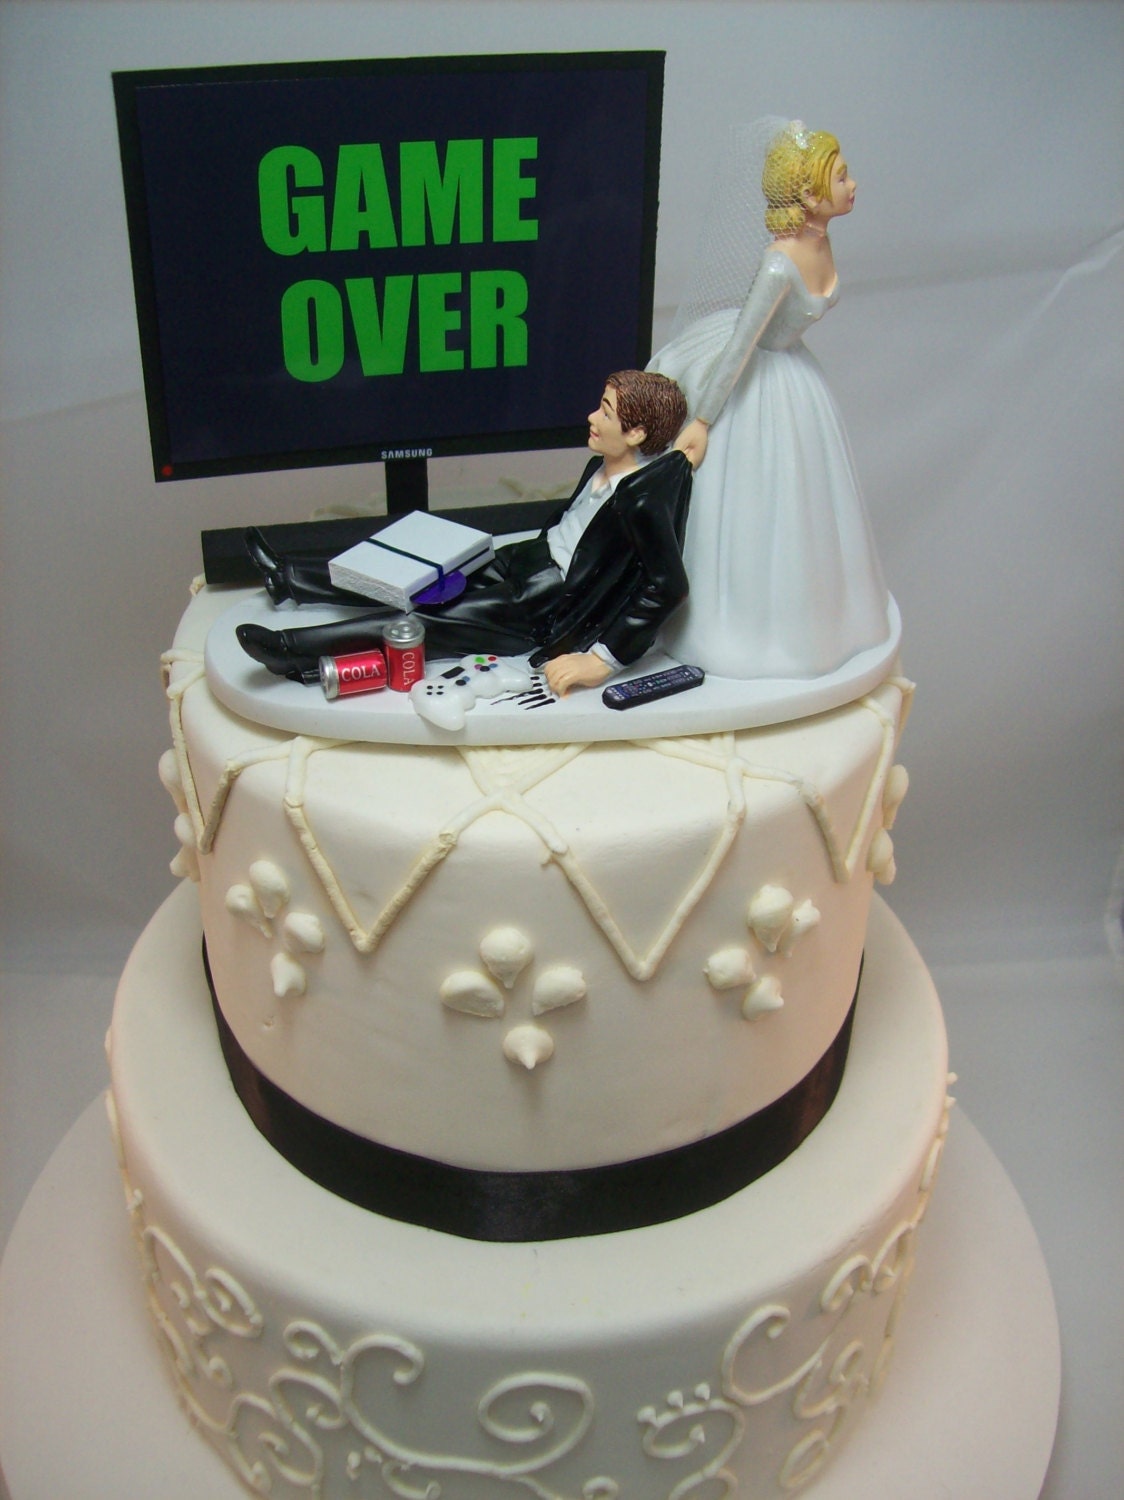 GAME OVER or ANY Game/image Funny Wedding Cake Topper Custom